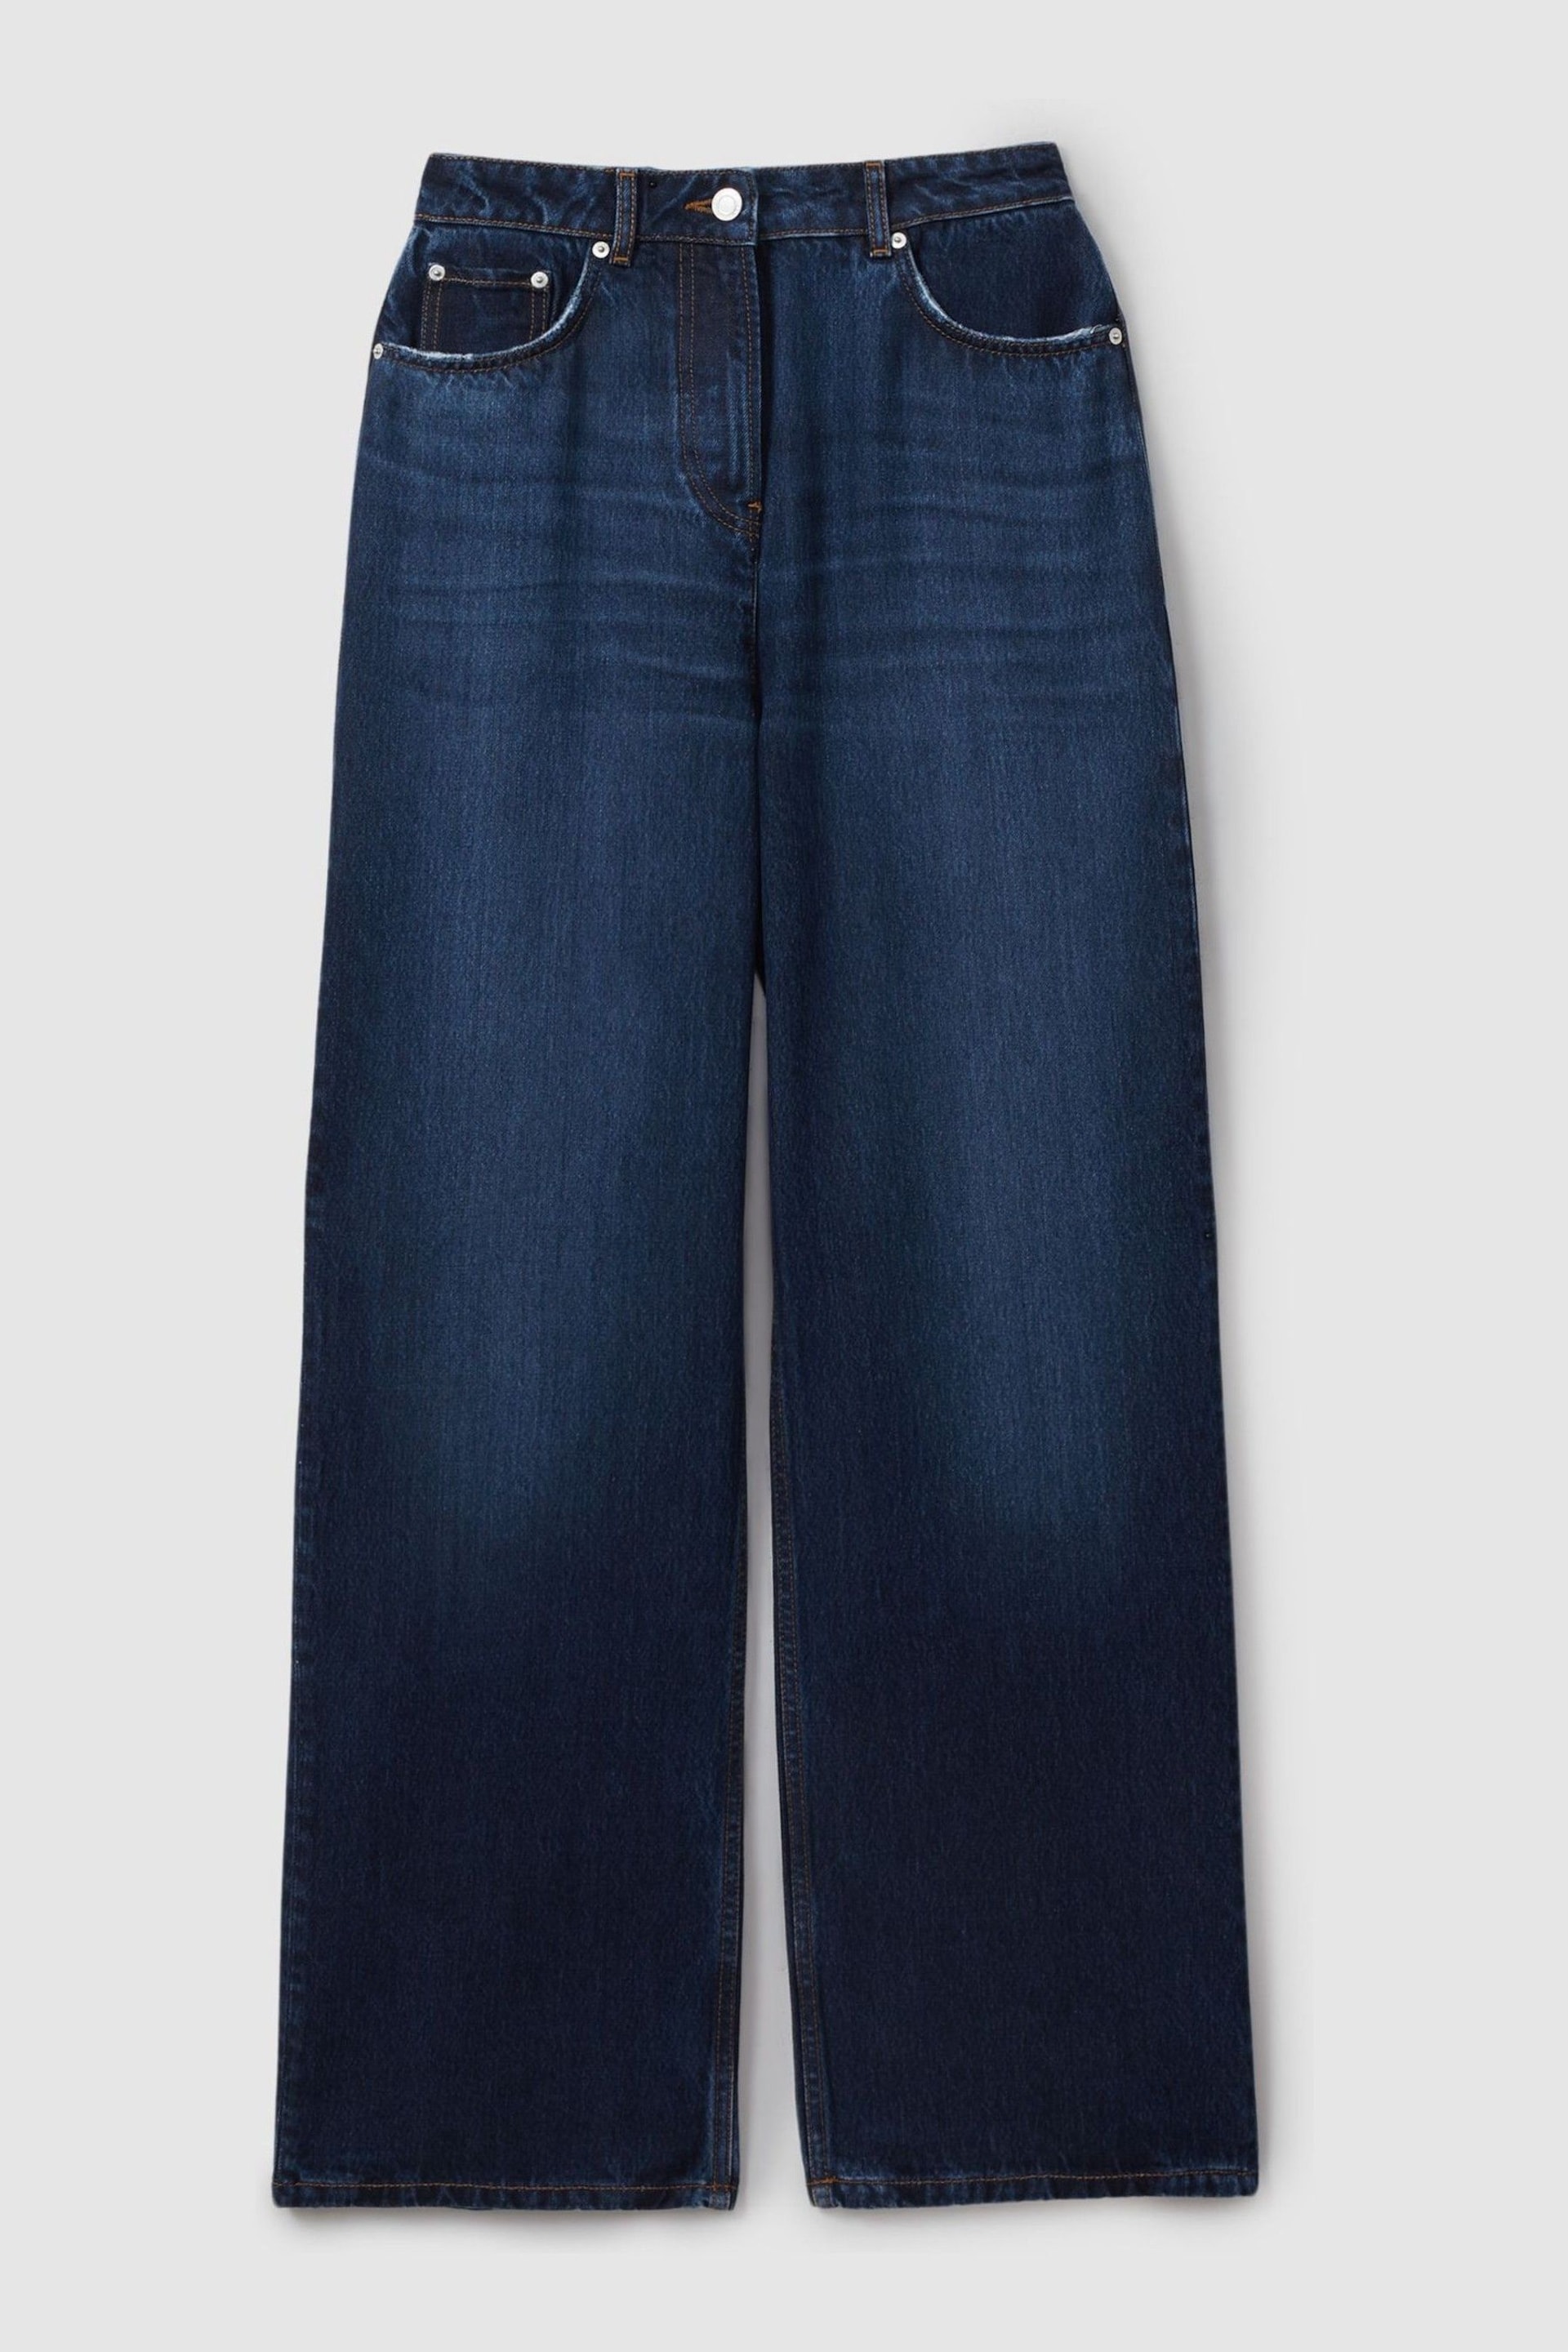 Reiss Dark Blue Lyle Petite Lightweight Viscose Blend Relaxed Jeans - Image 2 of 6